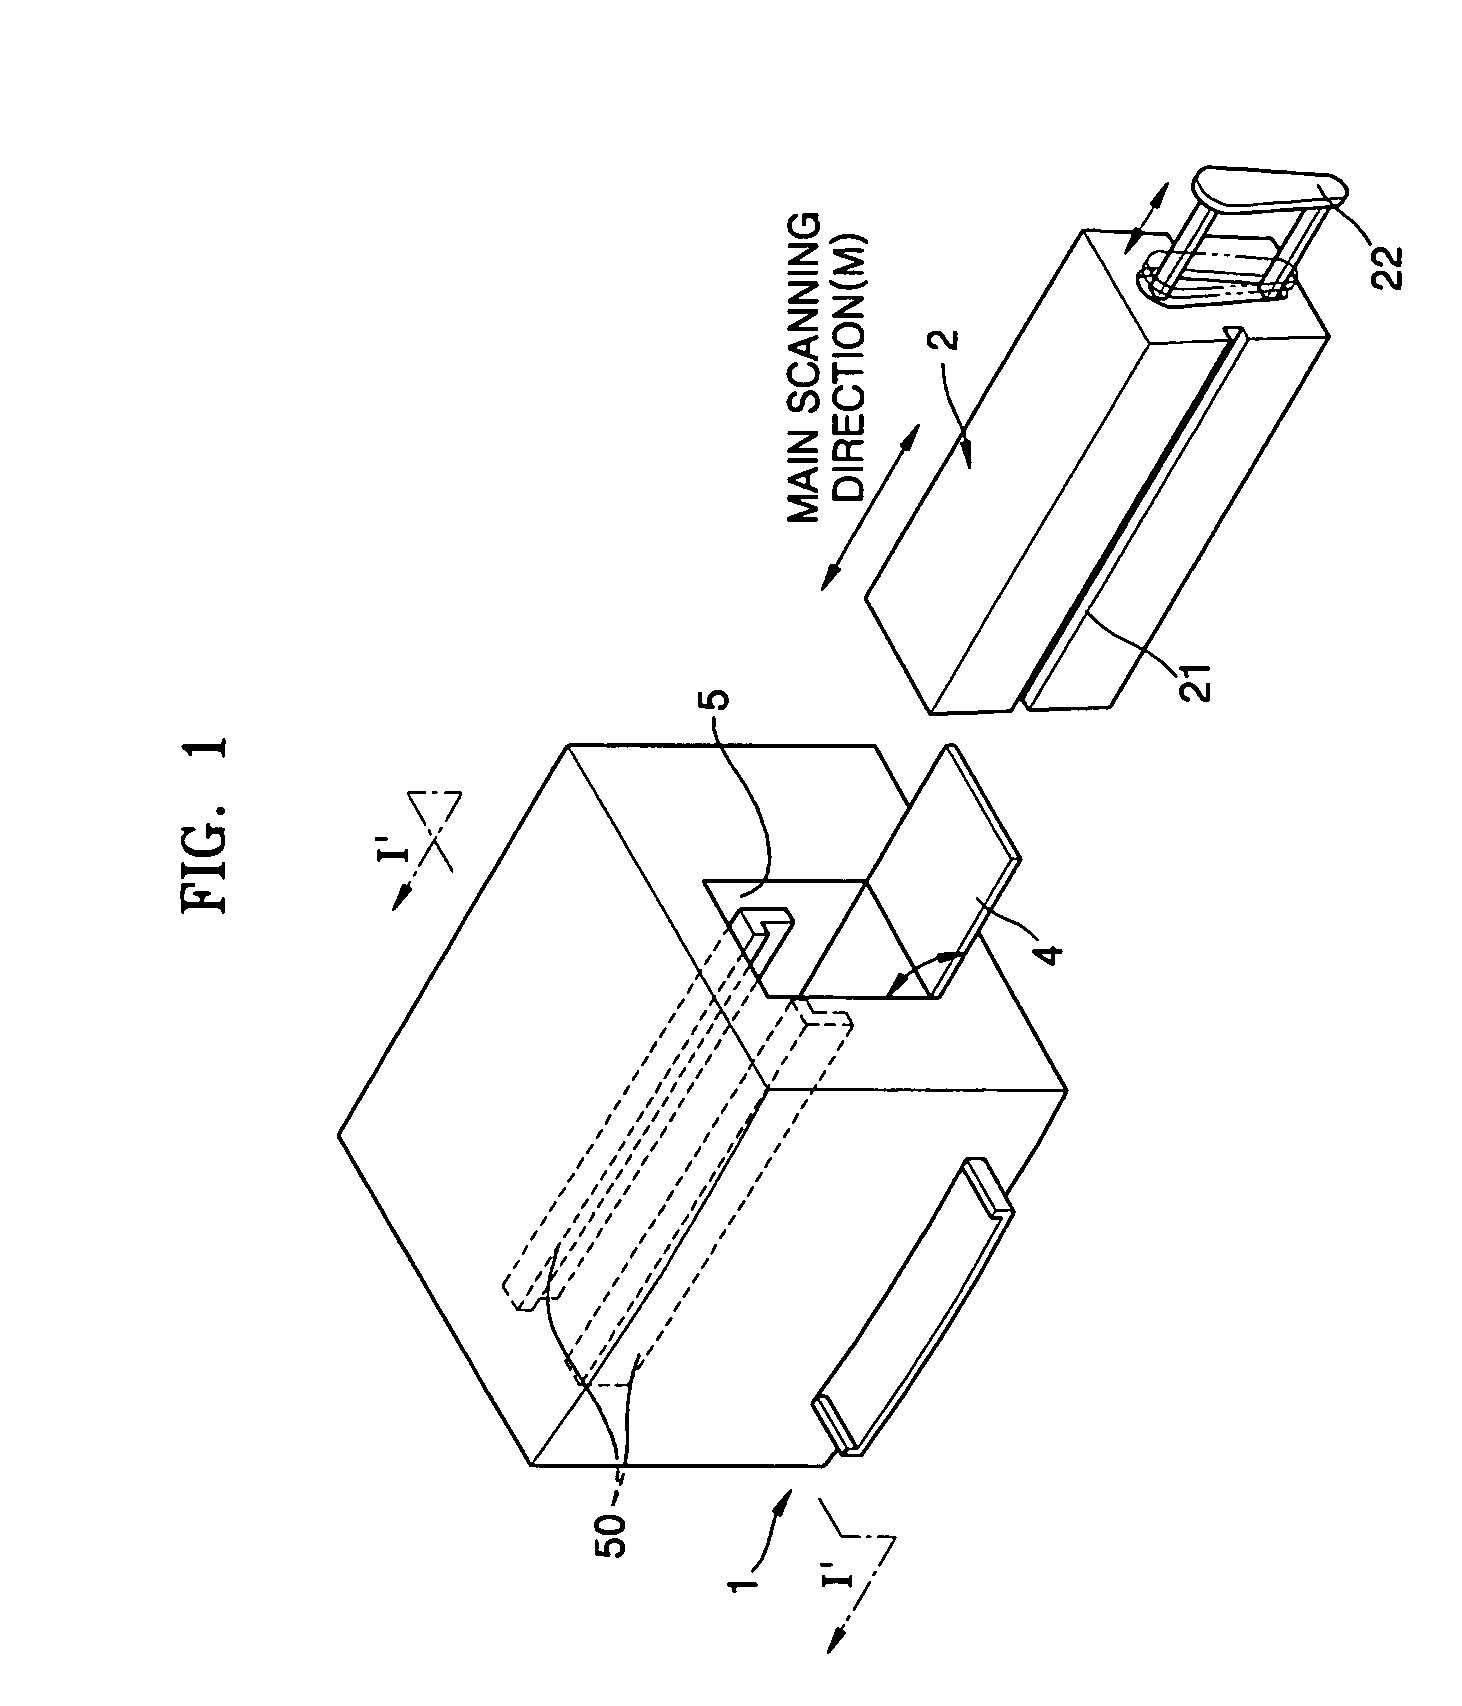 Inkjet image forming apparatus having a nozzle unit and method of using the same